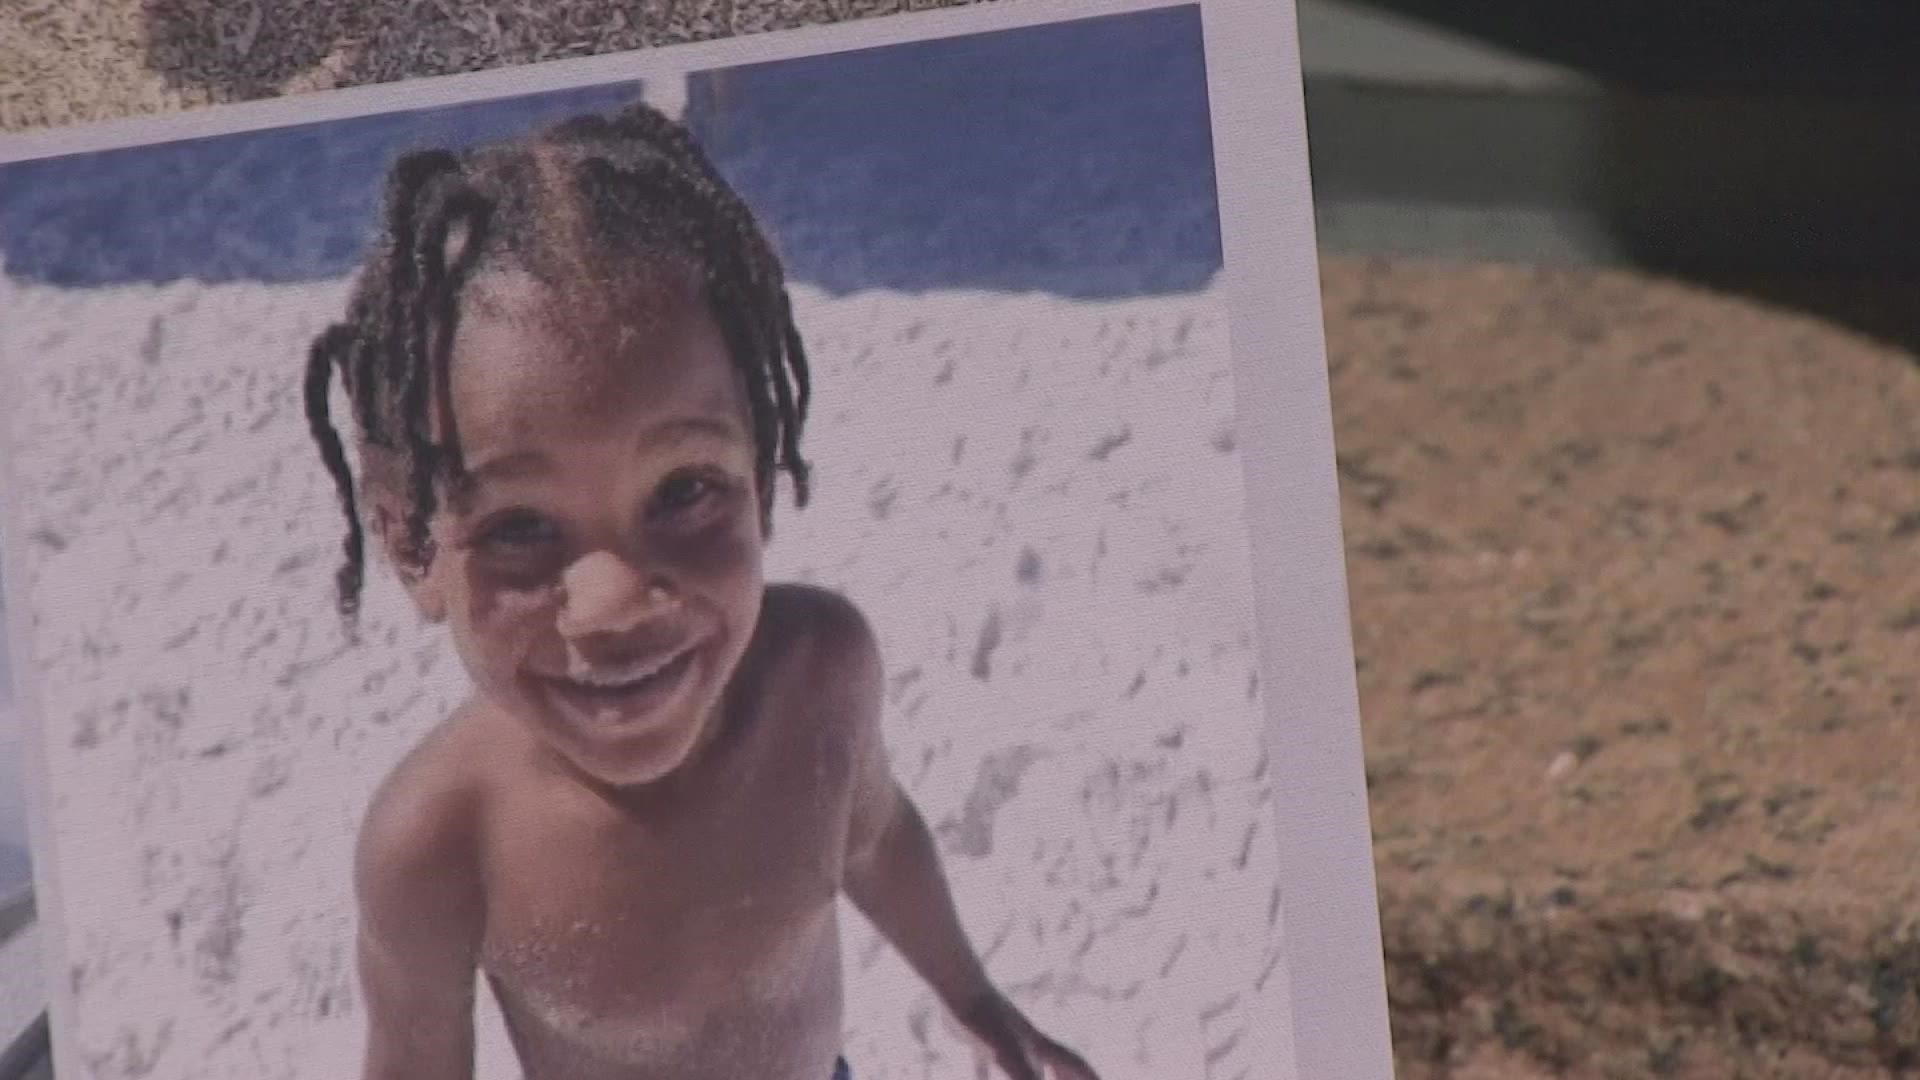 Bakari Williams became ill in September 2021 after being killed by a brain-eating amoeba linked to a City of Arlington parks splash pad.